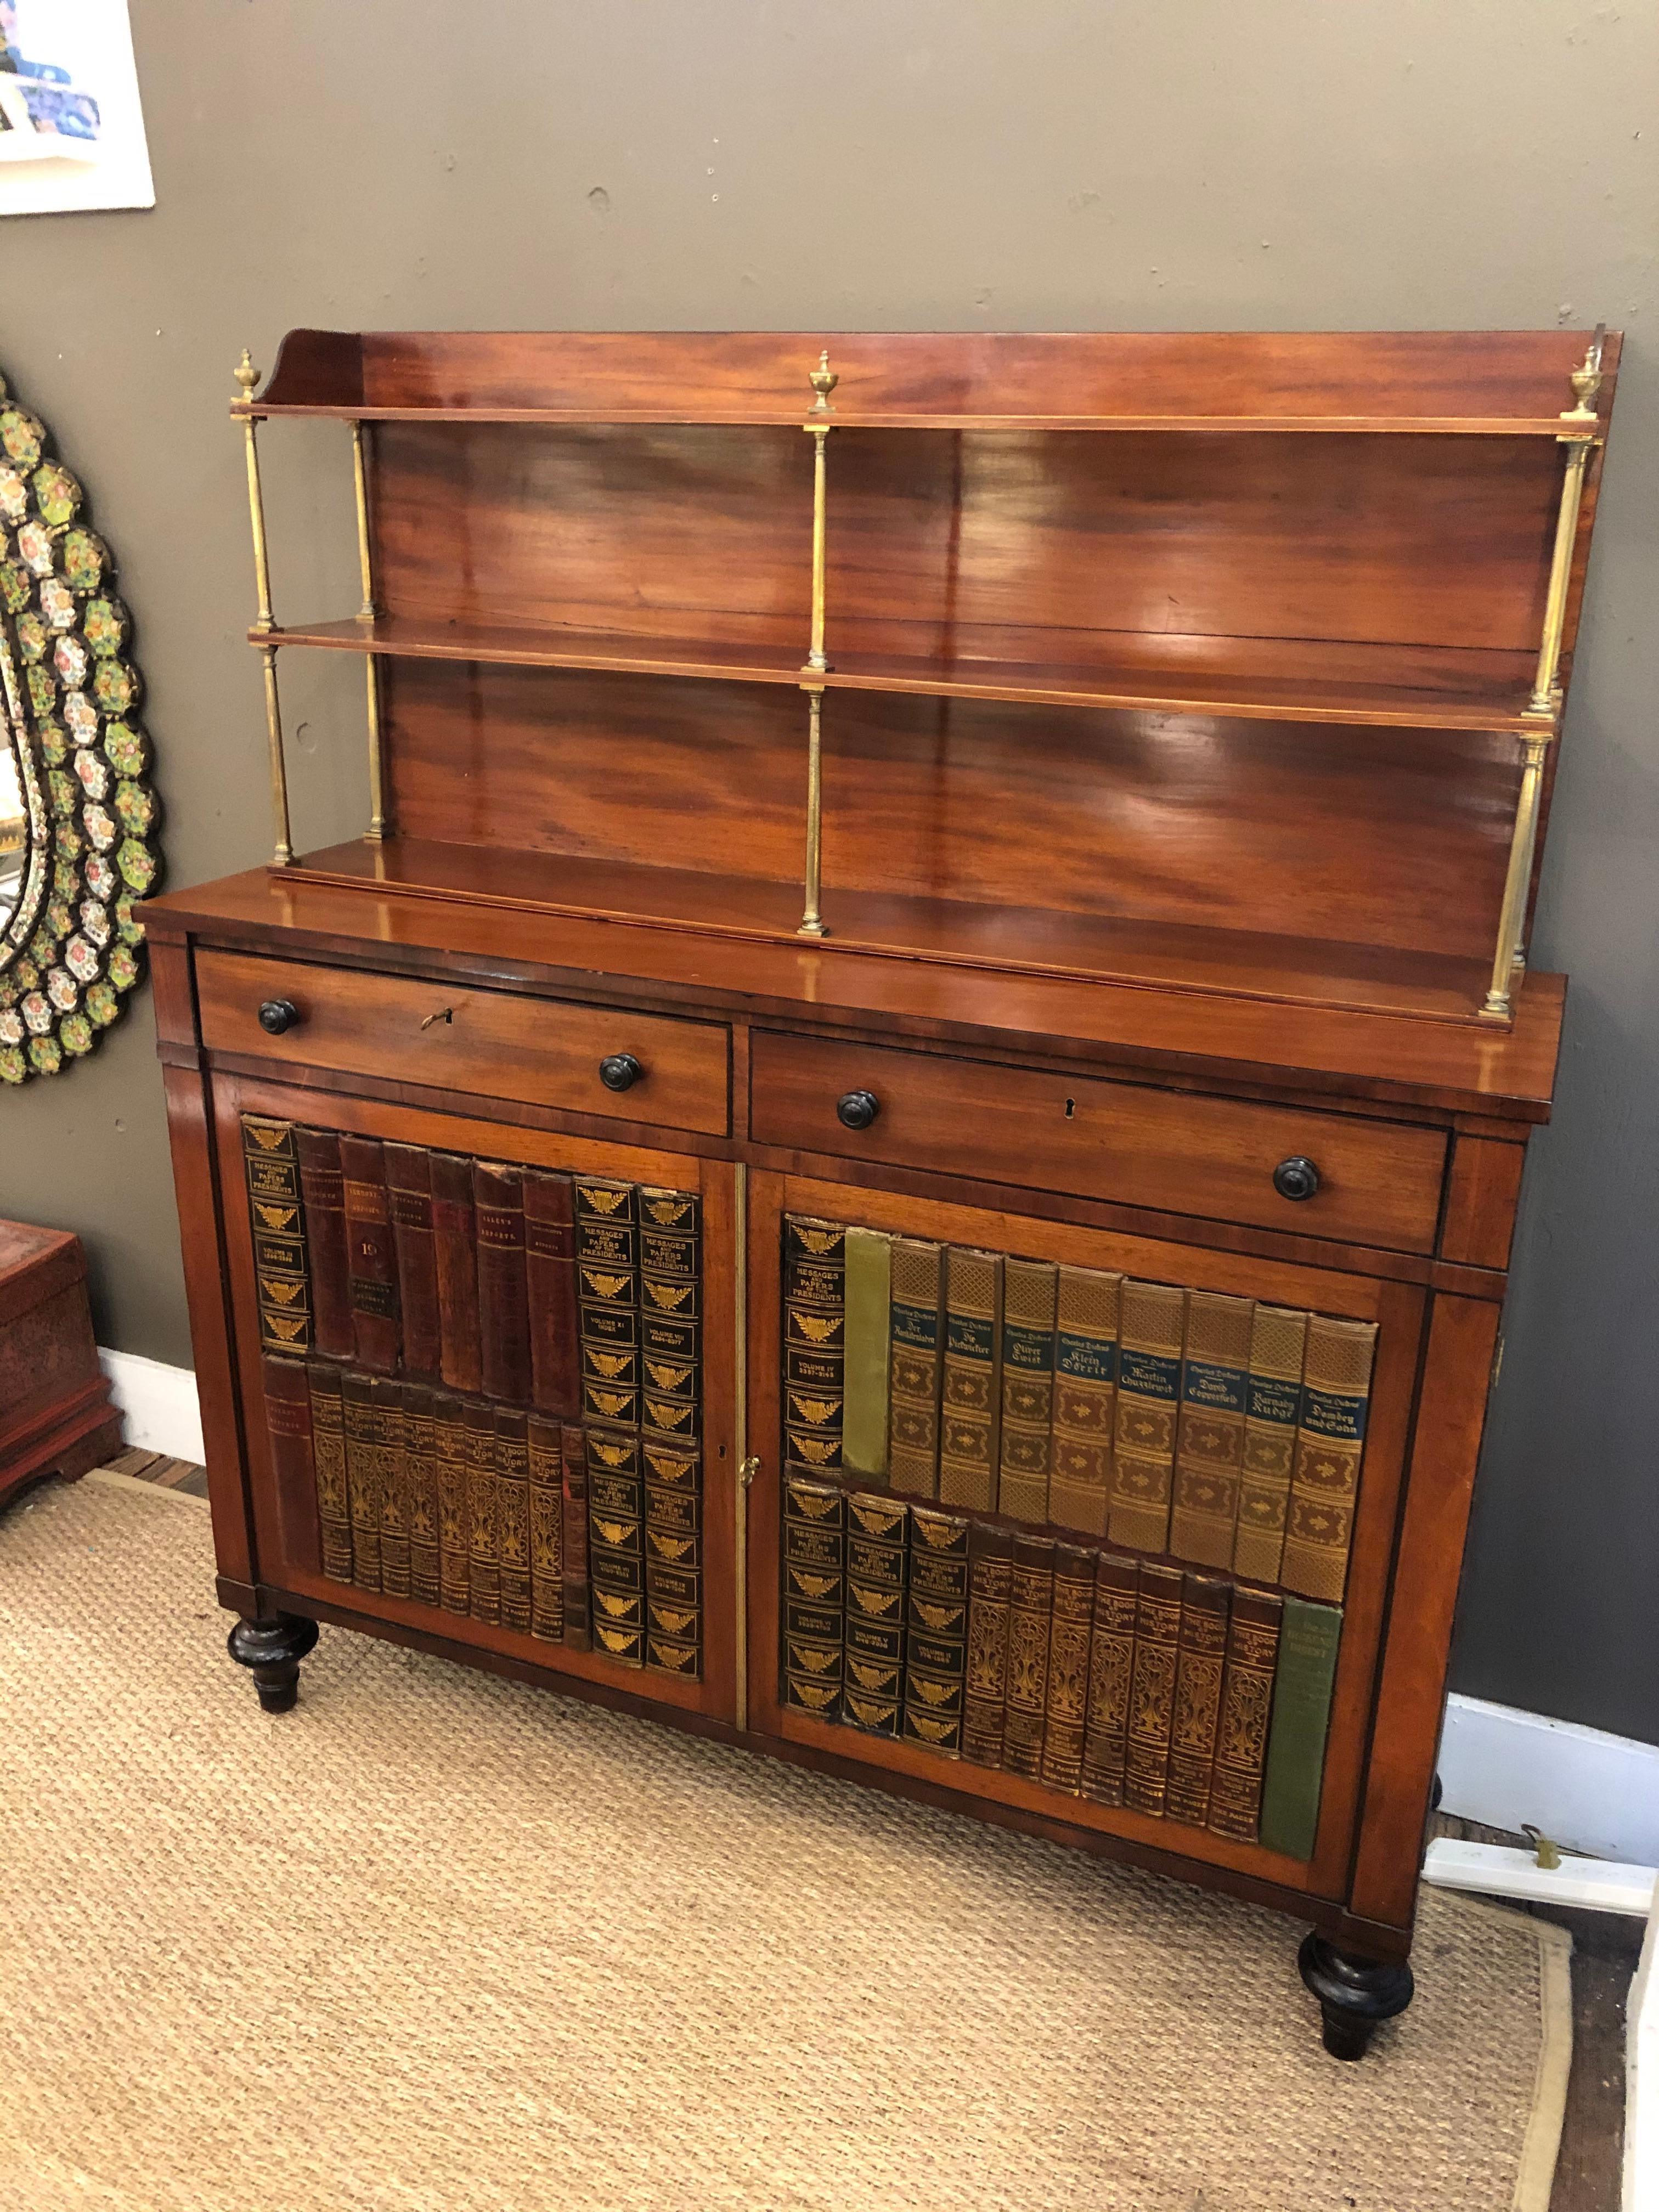 Wonderful character rich 19th century mahogany chiffonier cabinet having tromp l'oeil leather books on the fascade of the the lower cabinet (49.5 W 14 D 36 H) with lined adjustable shelf within and two drawers above. The top shelves rest on bottom